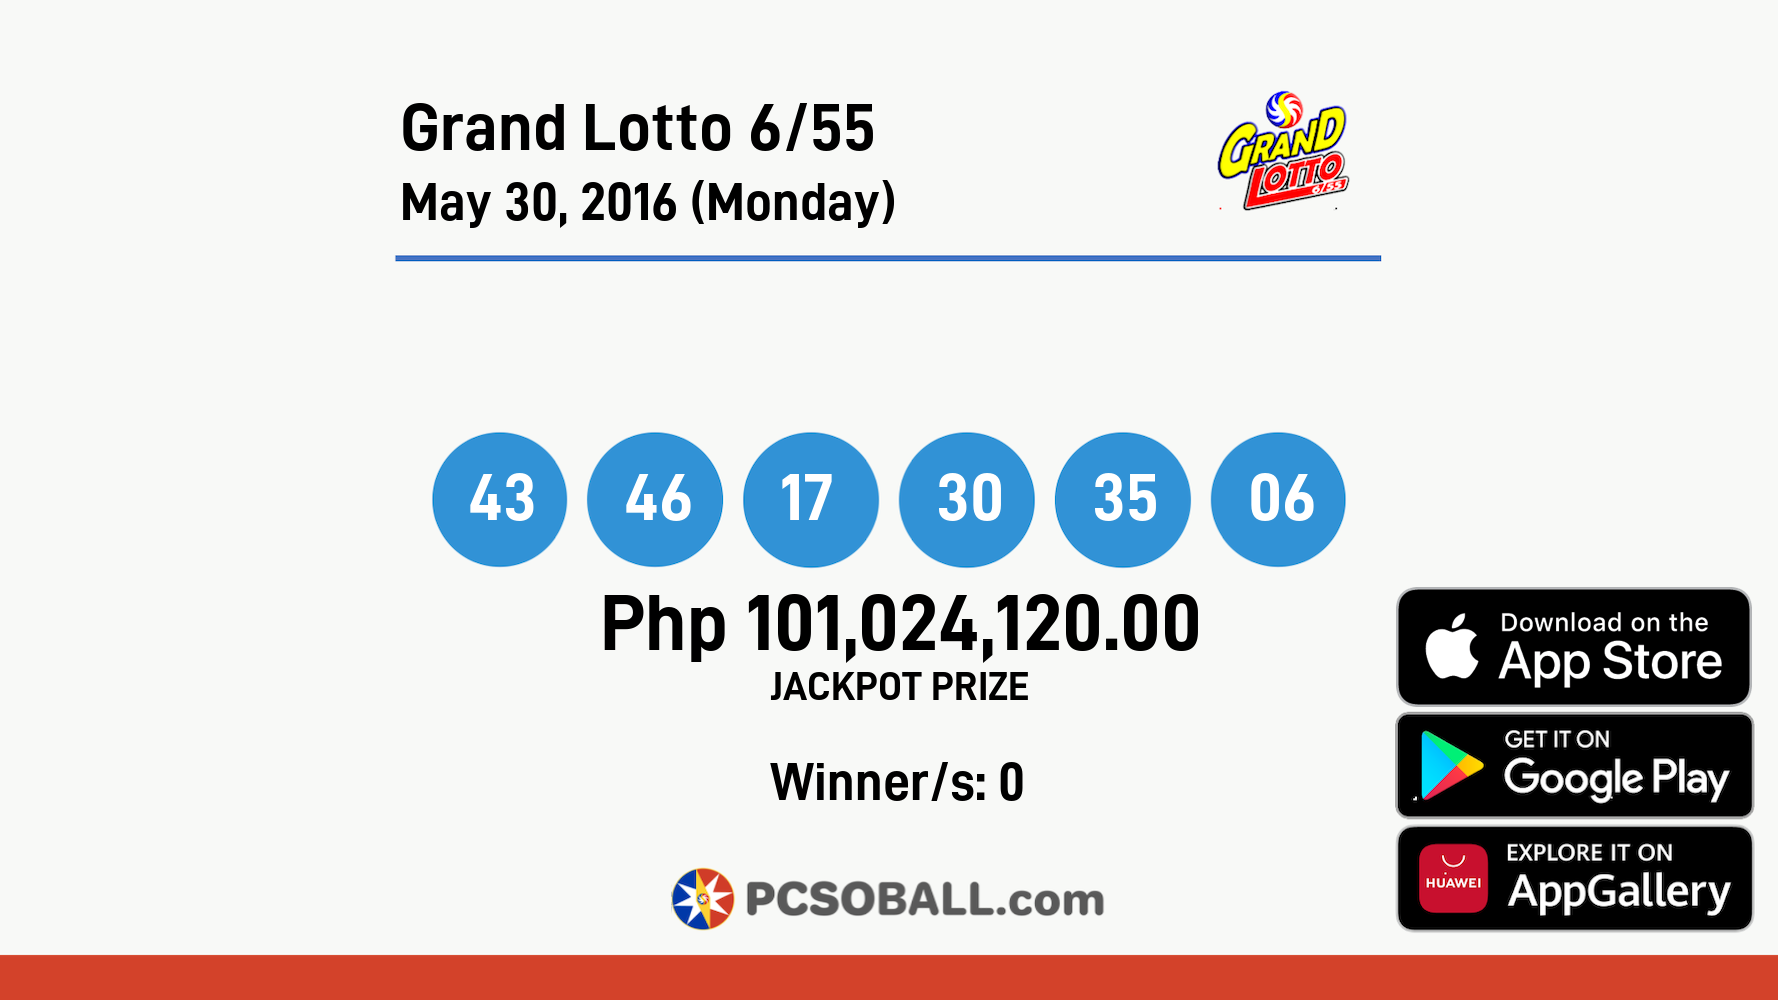 Grand Lotto 6/55 May 30, 2016 (Monday) Result